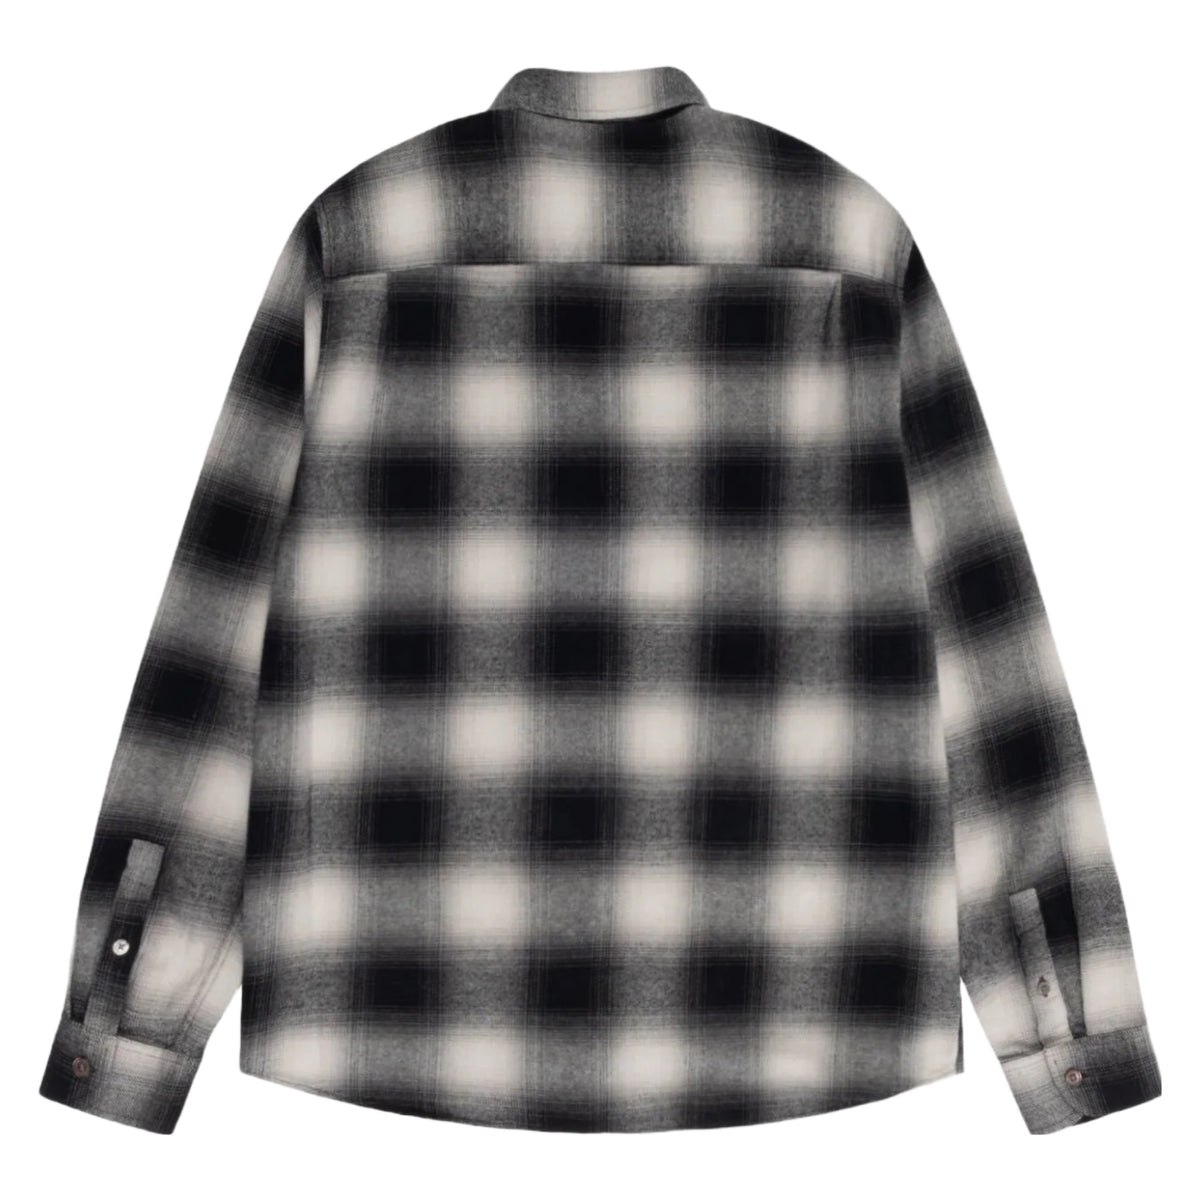 Shop Our Stussy Bay Plaid Shirt - Charcoal Stussy and Get the best